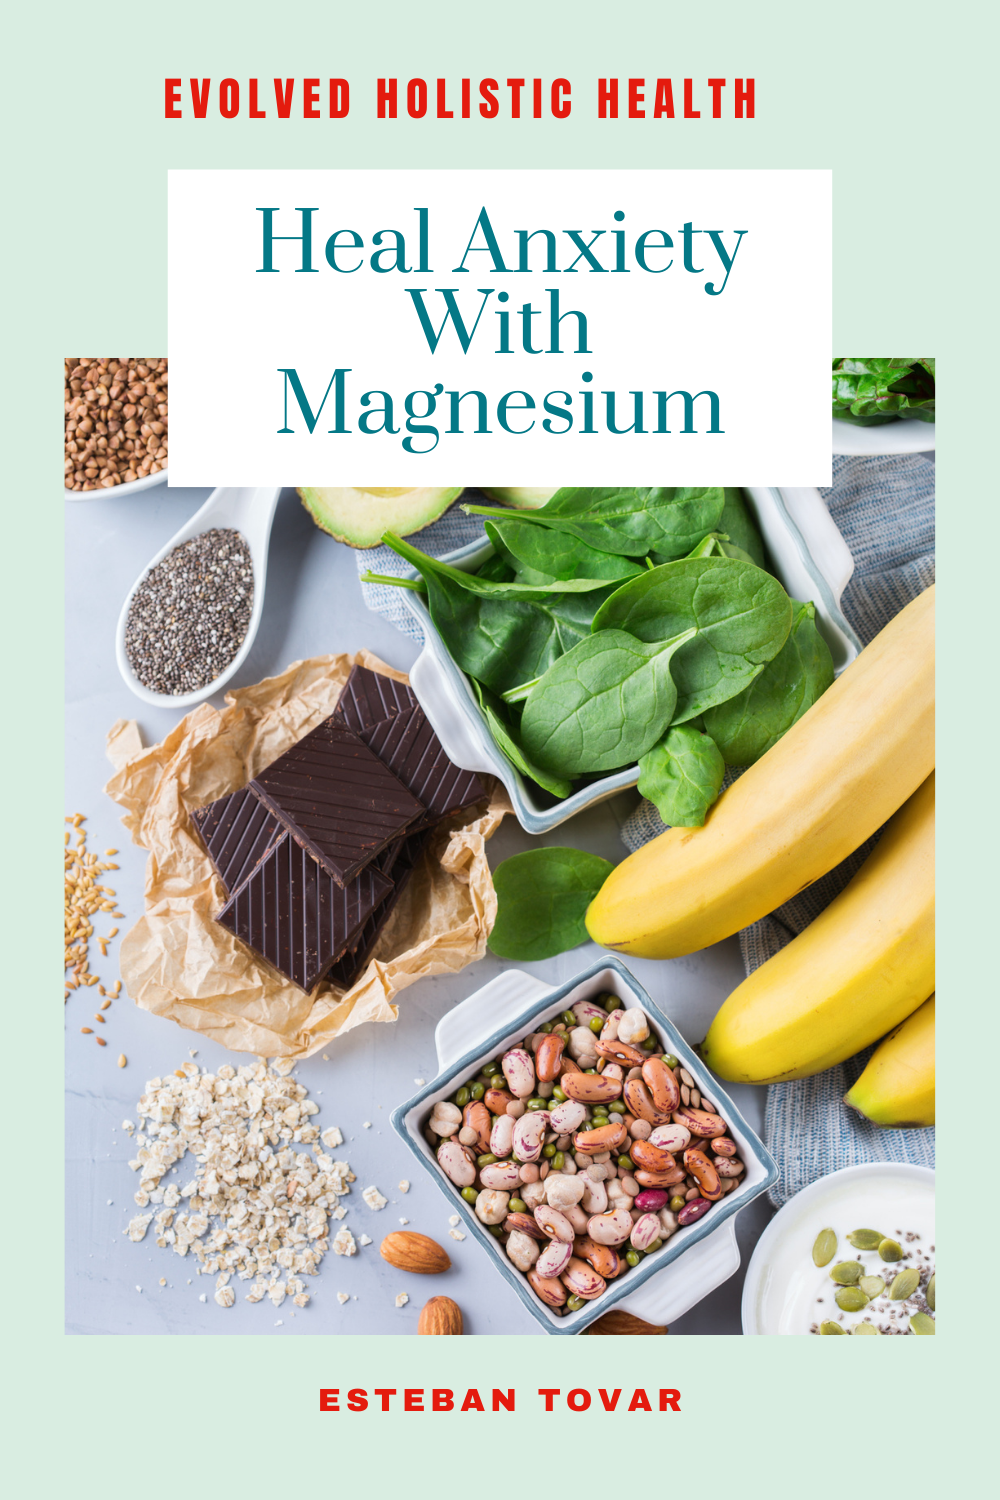 Does Magnesium Really Help with Anxiety?